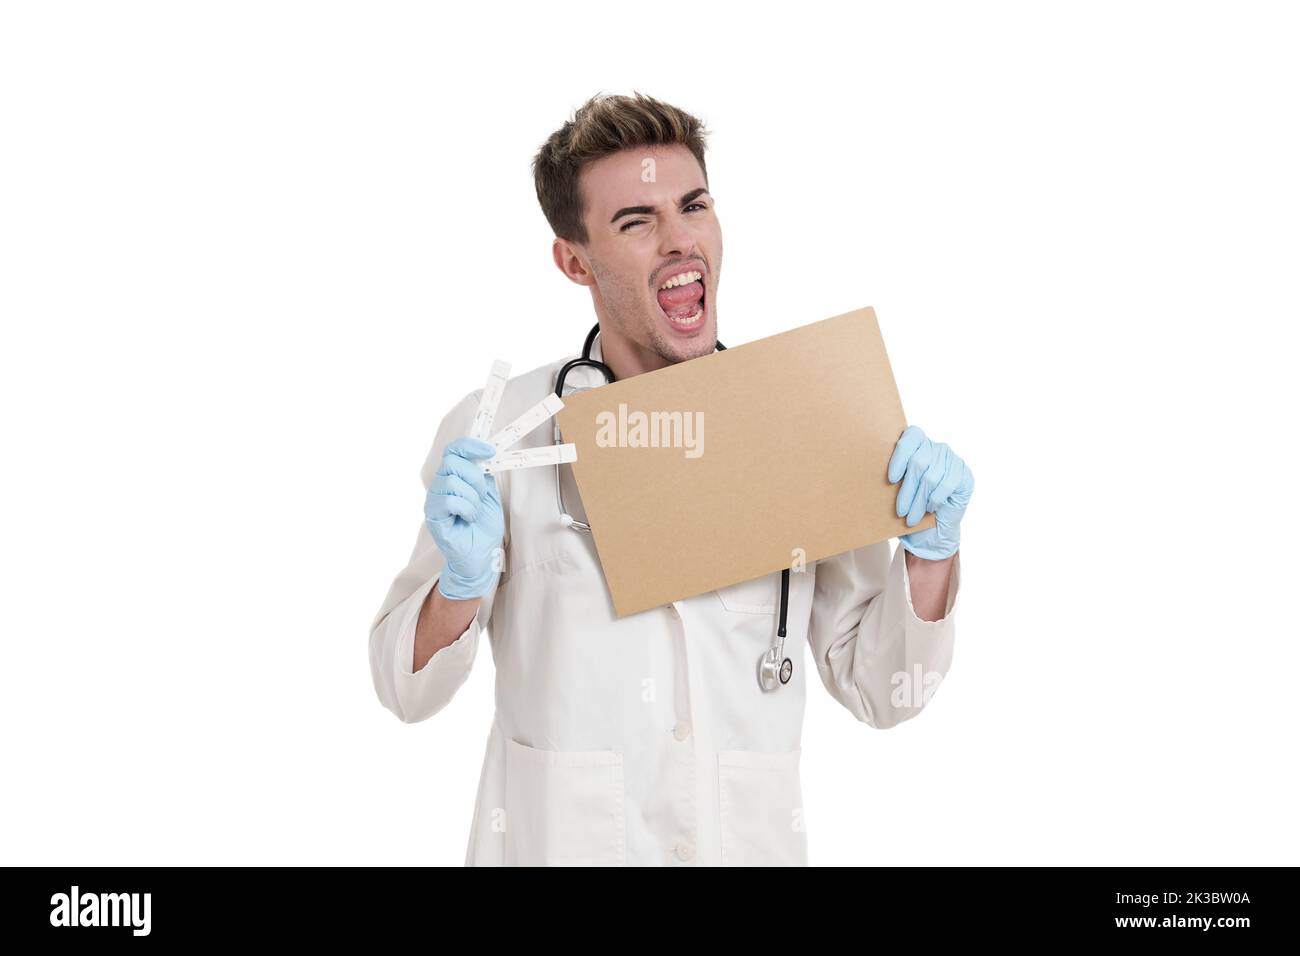 Young doctor shouting with a board and negative covid-19 antigen test, isolated. Stock Photo